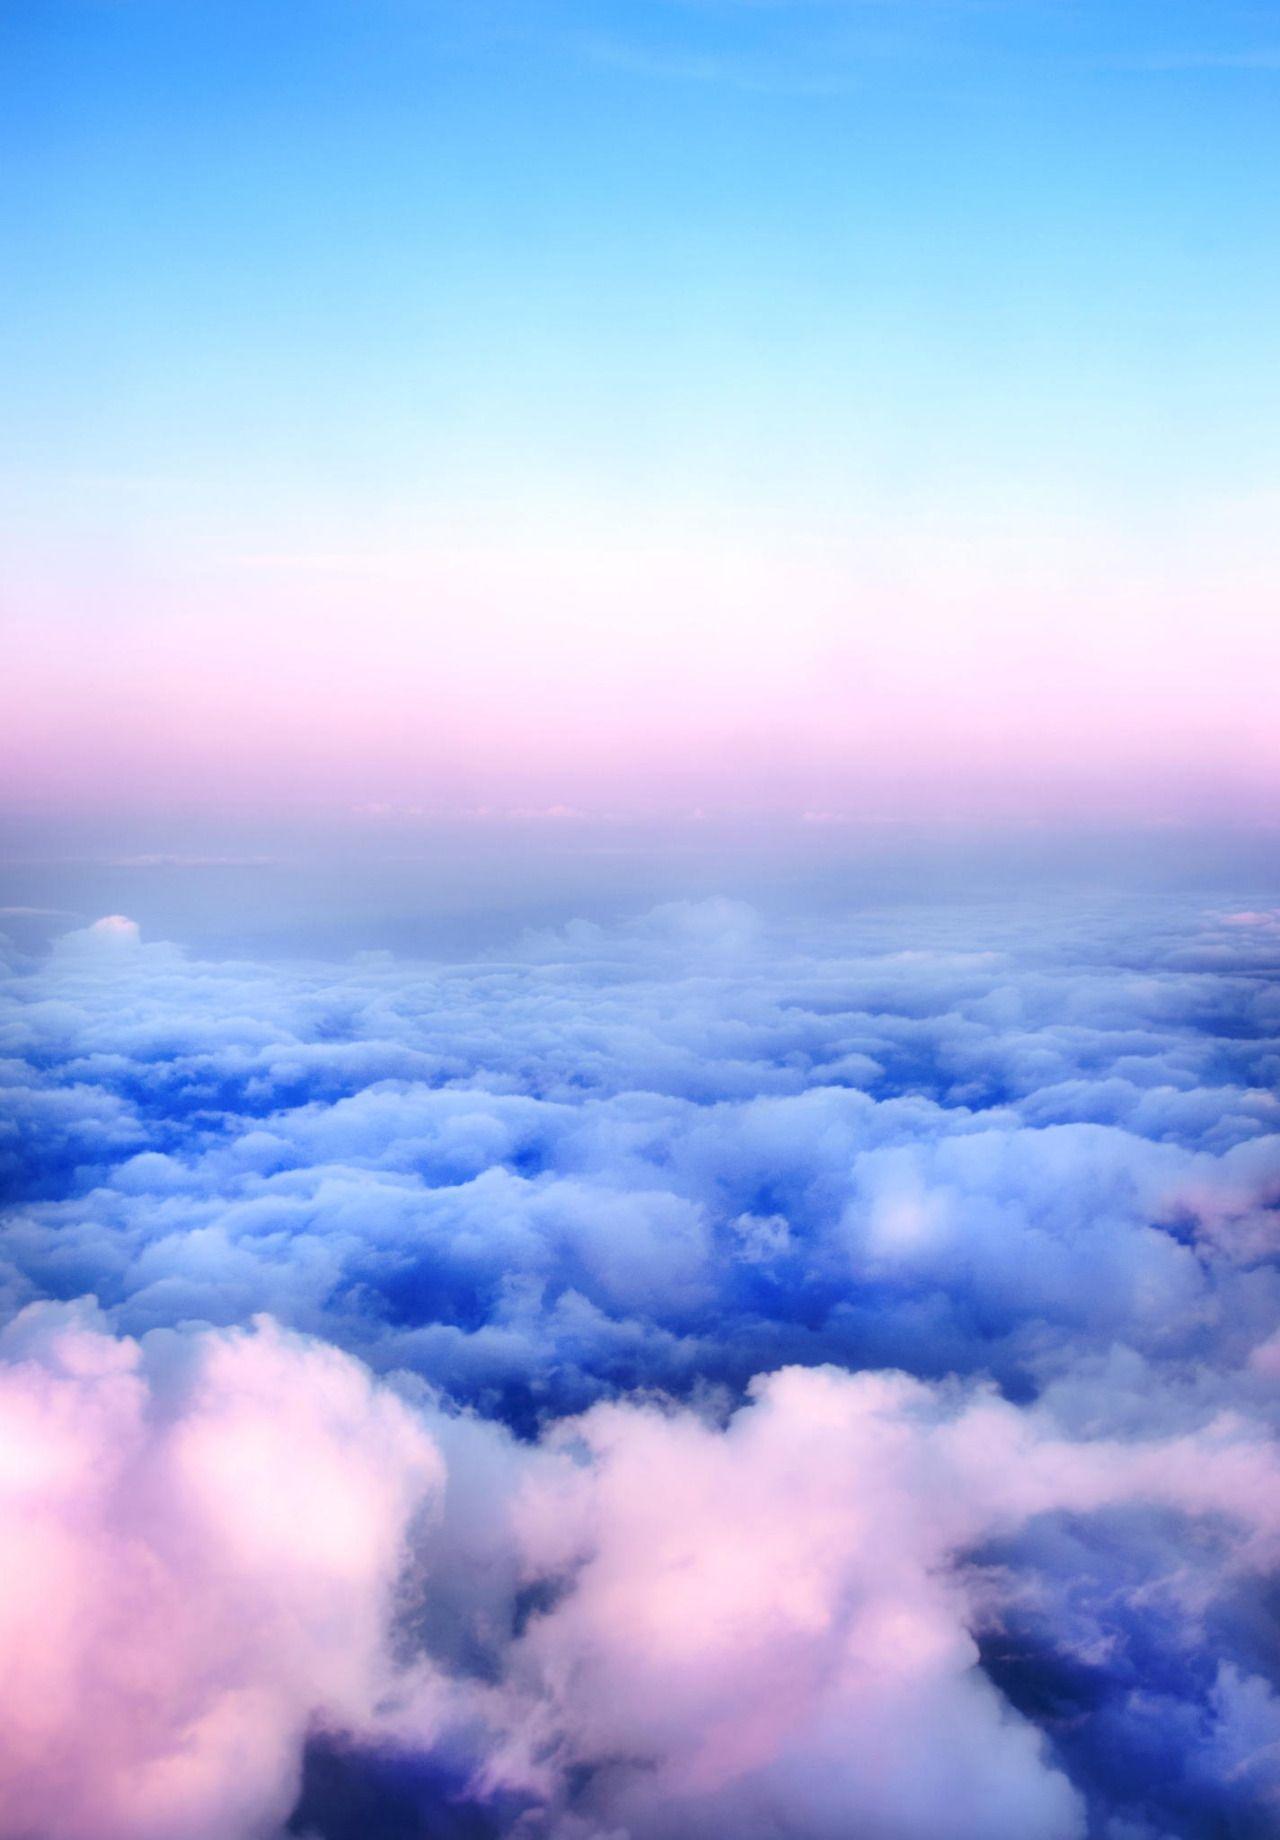 Pink Tulle, te5seract: Dream Clouds by Pauline Roupski. The world